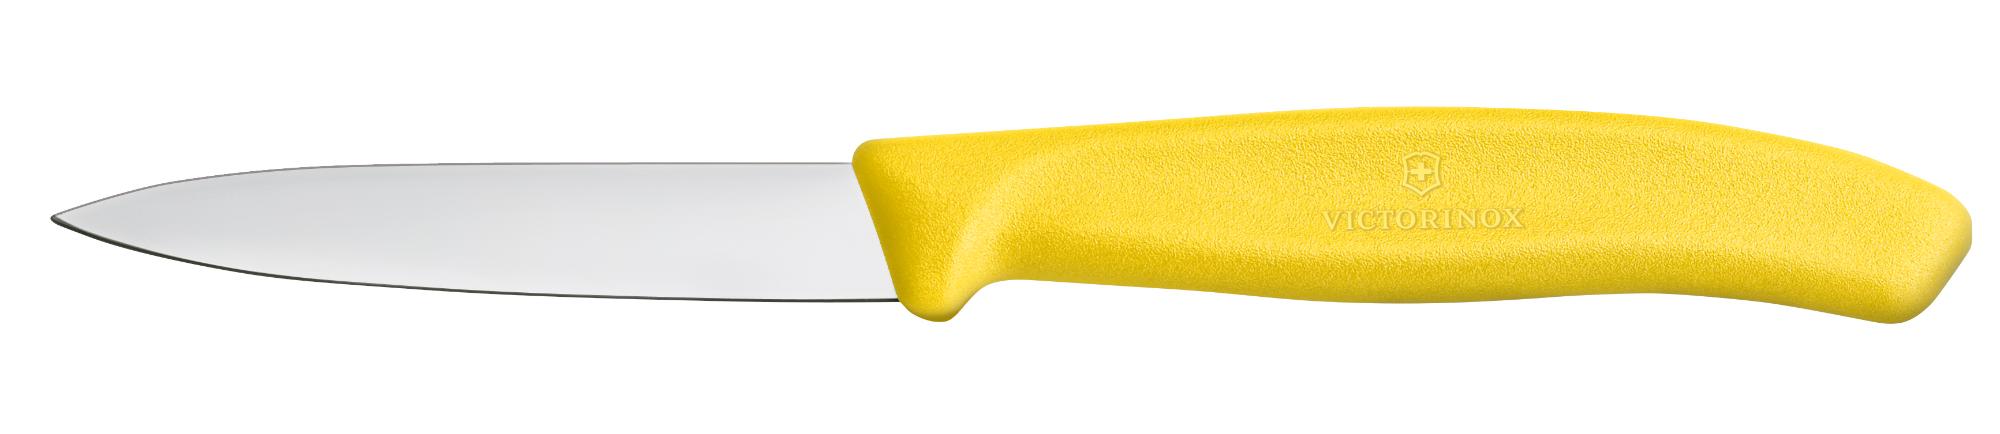 Swiss Classic vegetable knife, smooth, 8 cm - yellow